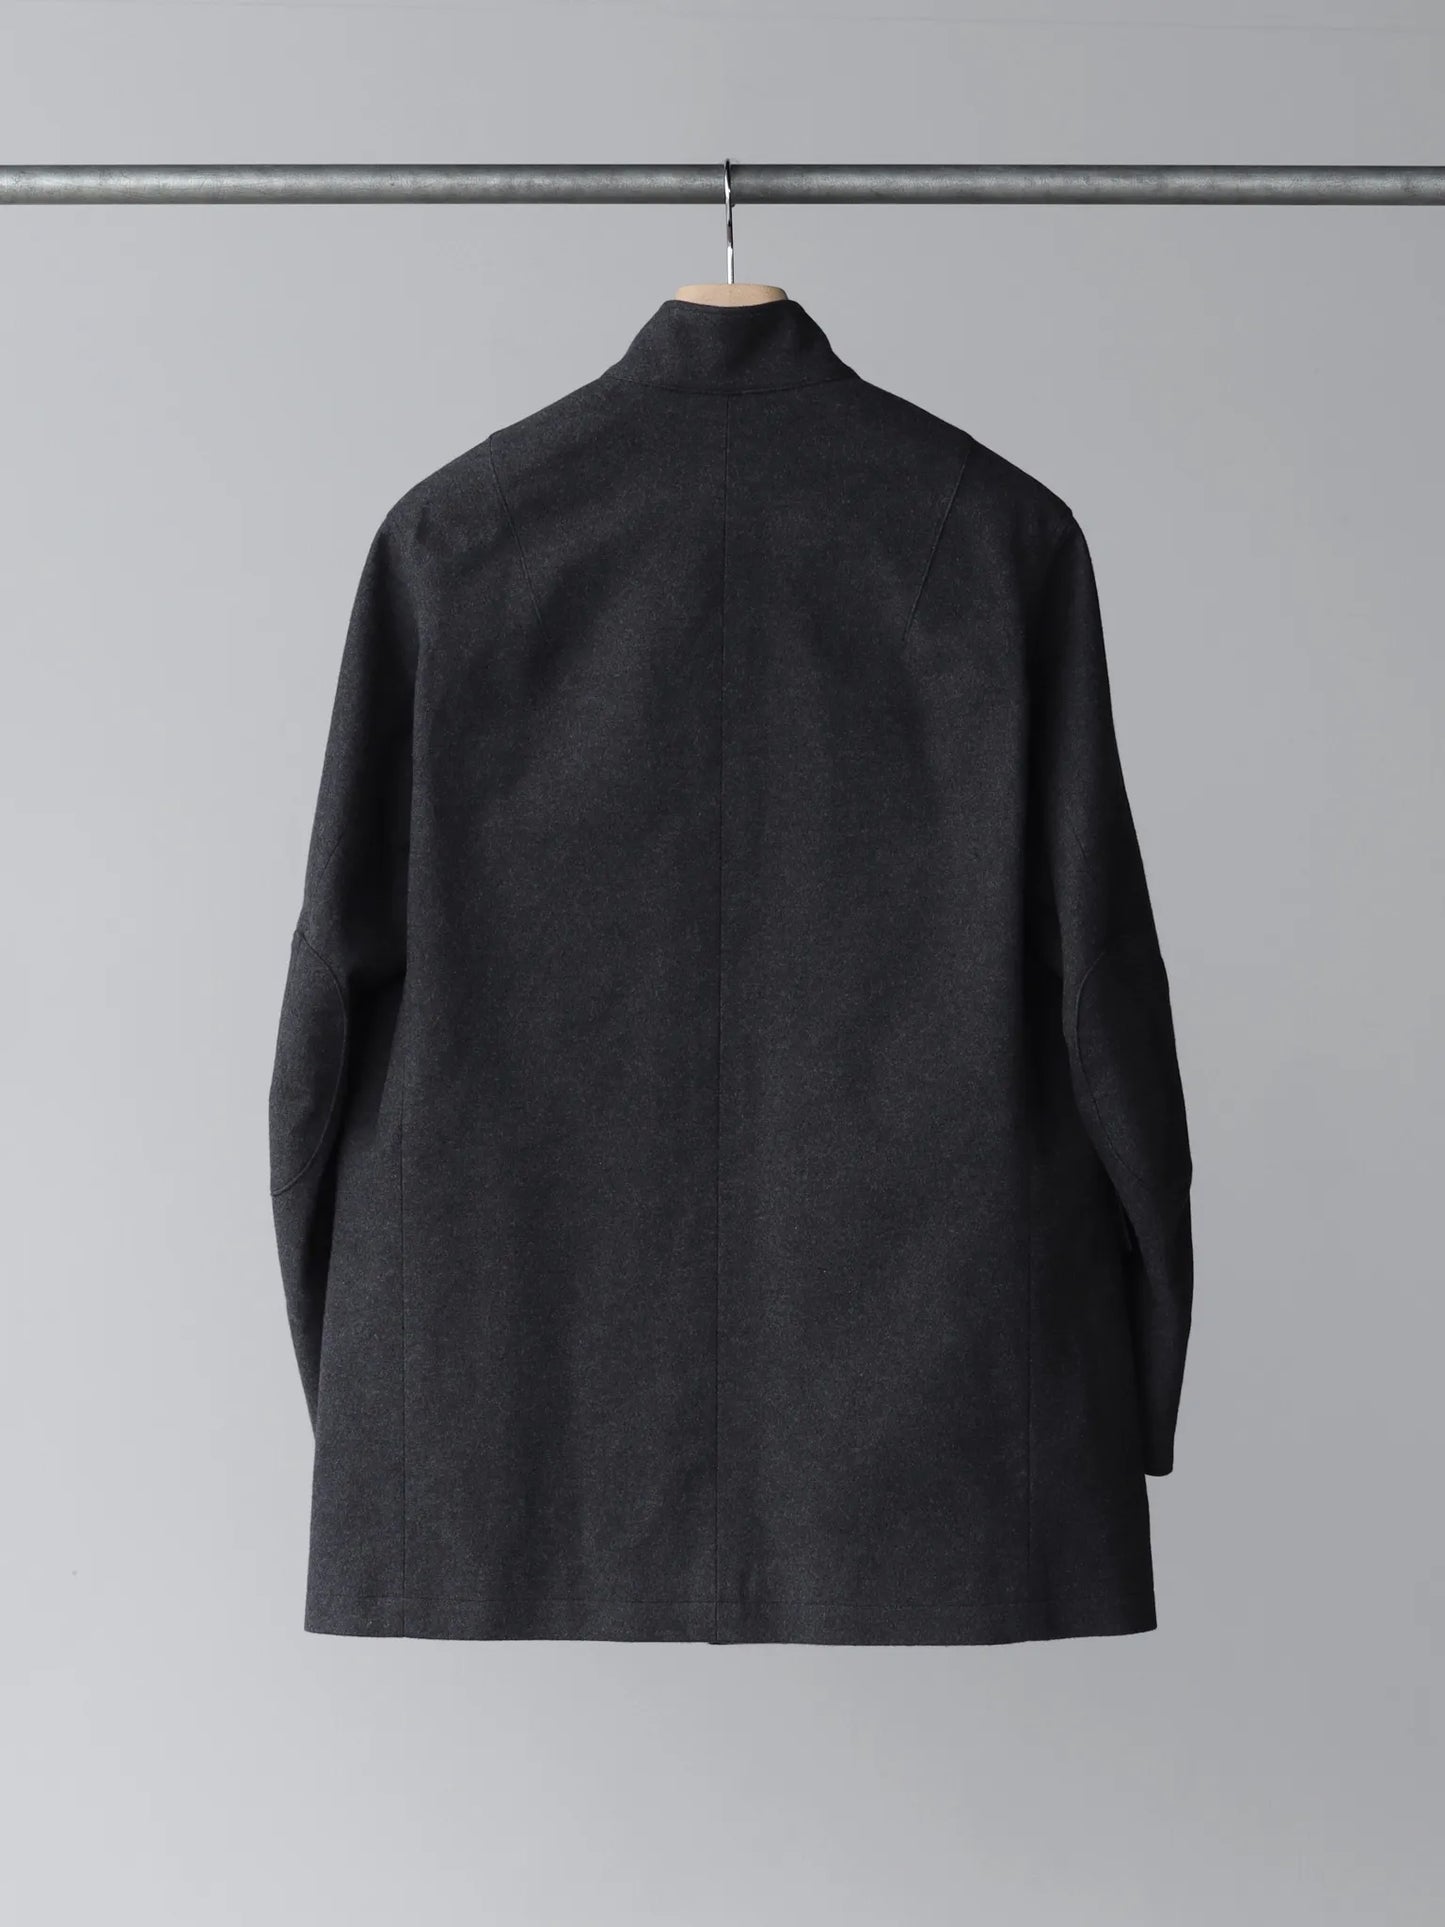 tilt-the-authentics-high-density-chambray-cotton-suede-french-jacket-charcoal-3